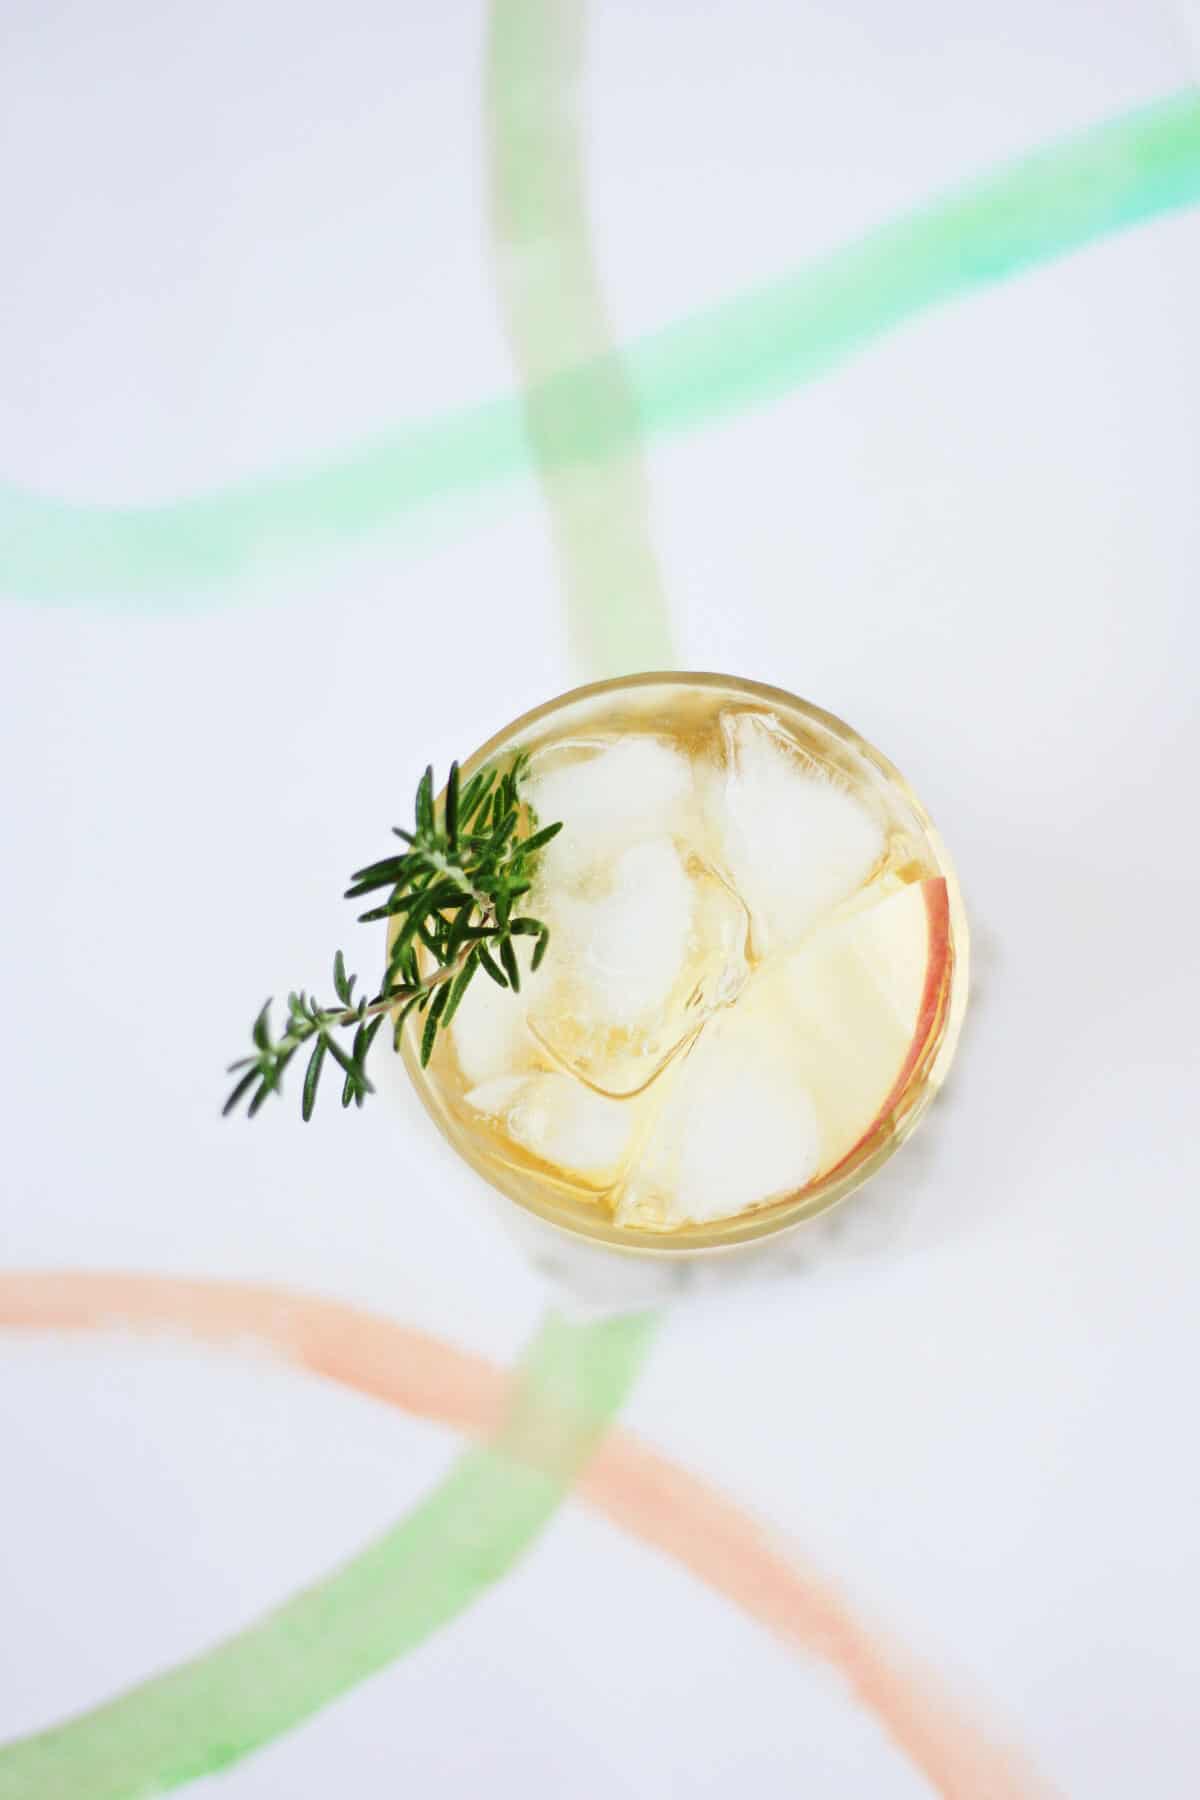 Overhead shot of yellow cocktail with ice cubes and a sprig of rosemary peeking out.